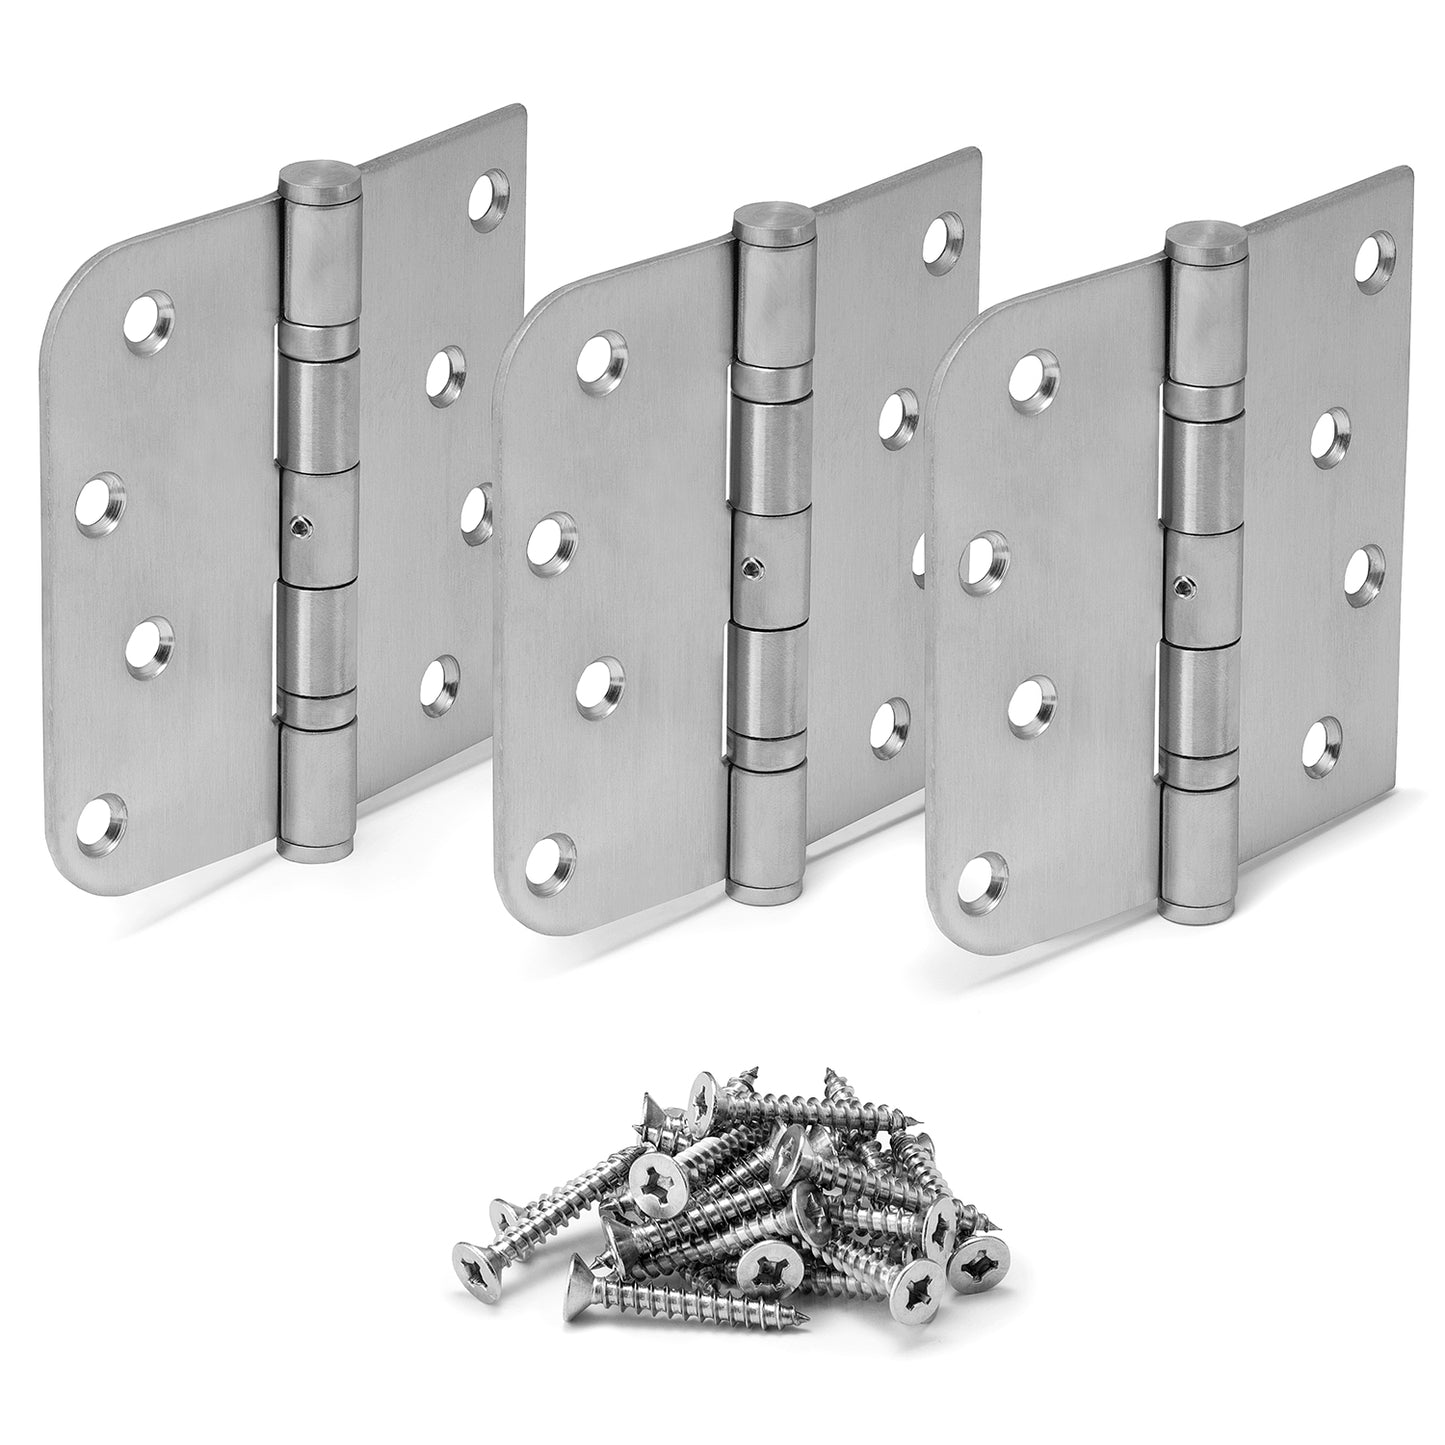 New KS Hardware Self Closing Spring Hinge | Automatic Door Hinges with  Complete Installation Hardware | 4 X 4 with 1 Square & 5/8 Radius  Corners 